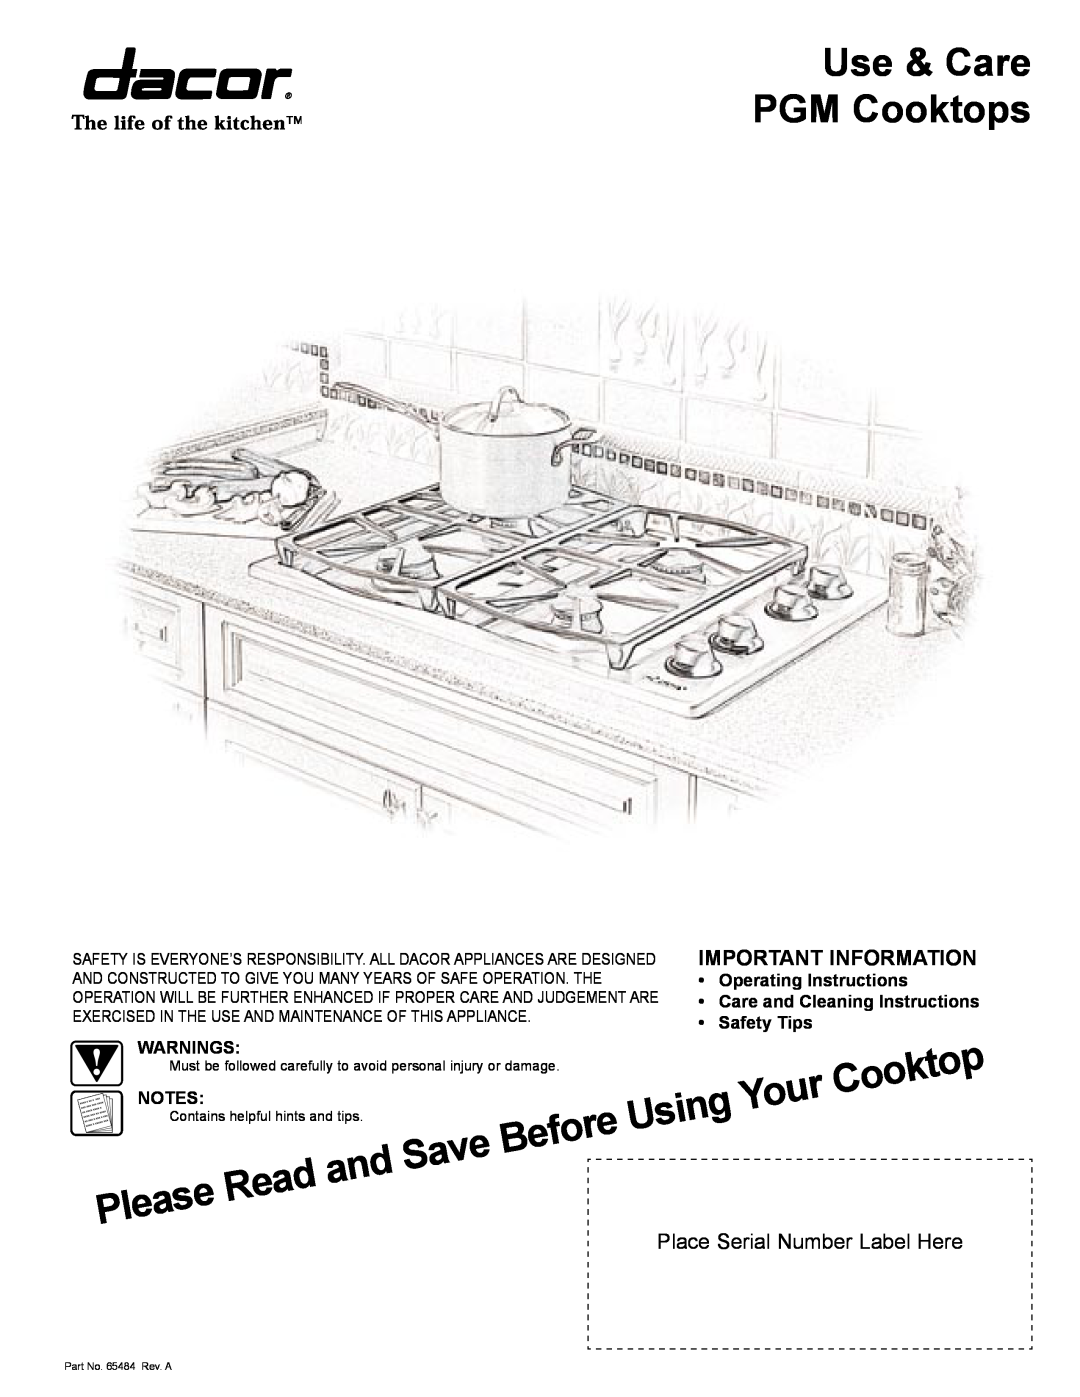 Dacor manual Use & Care PGM Cooktops, Important Information, Warnings, Place Serial Number Label Here 